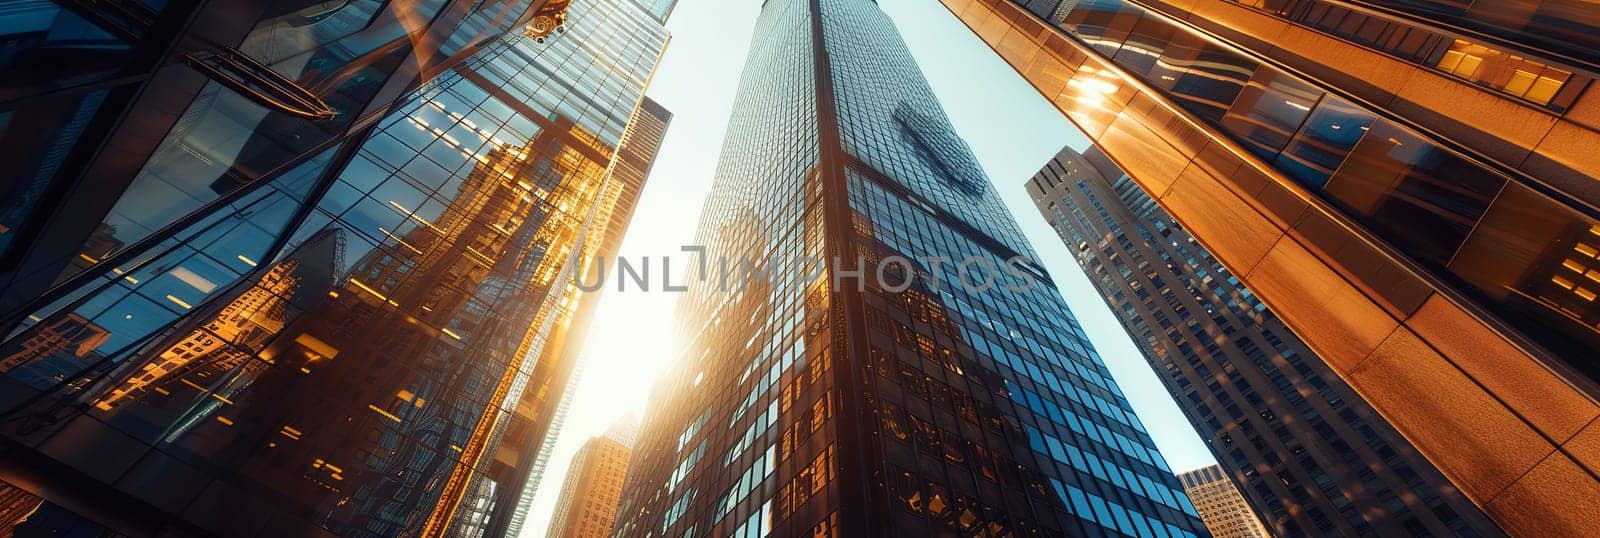 View from below of towering skyscrapers in the urban financial center of New York City.